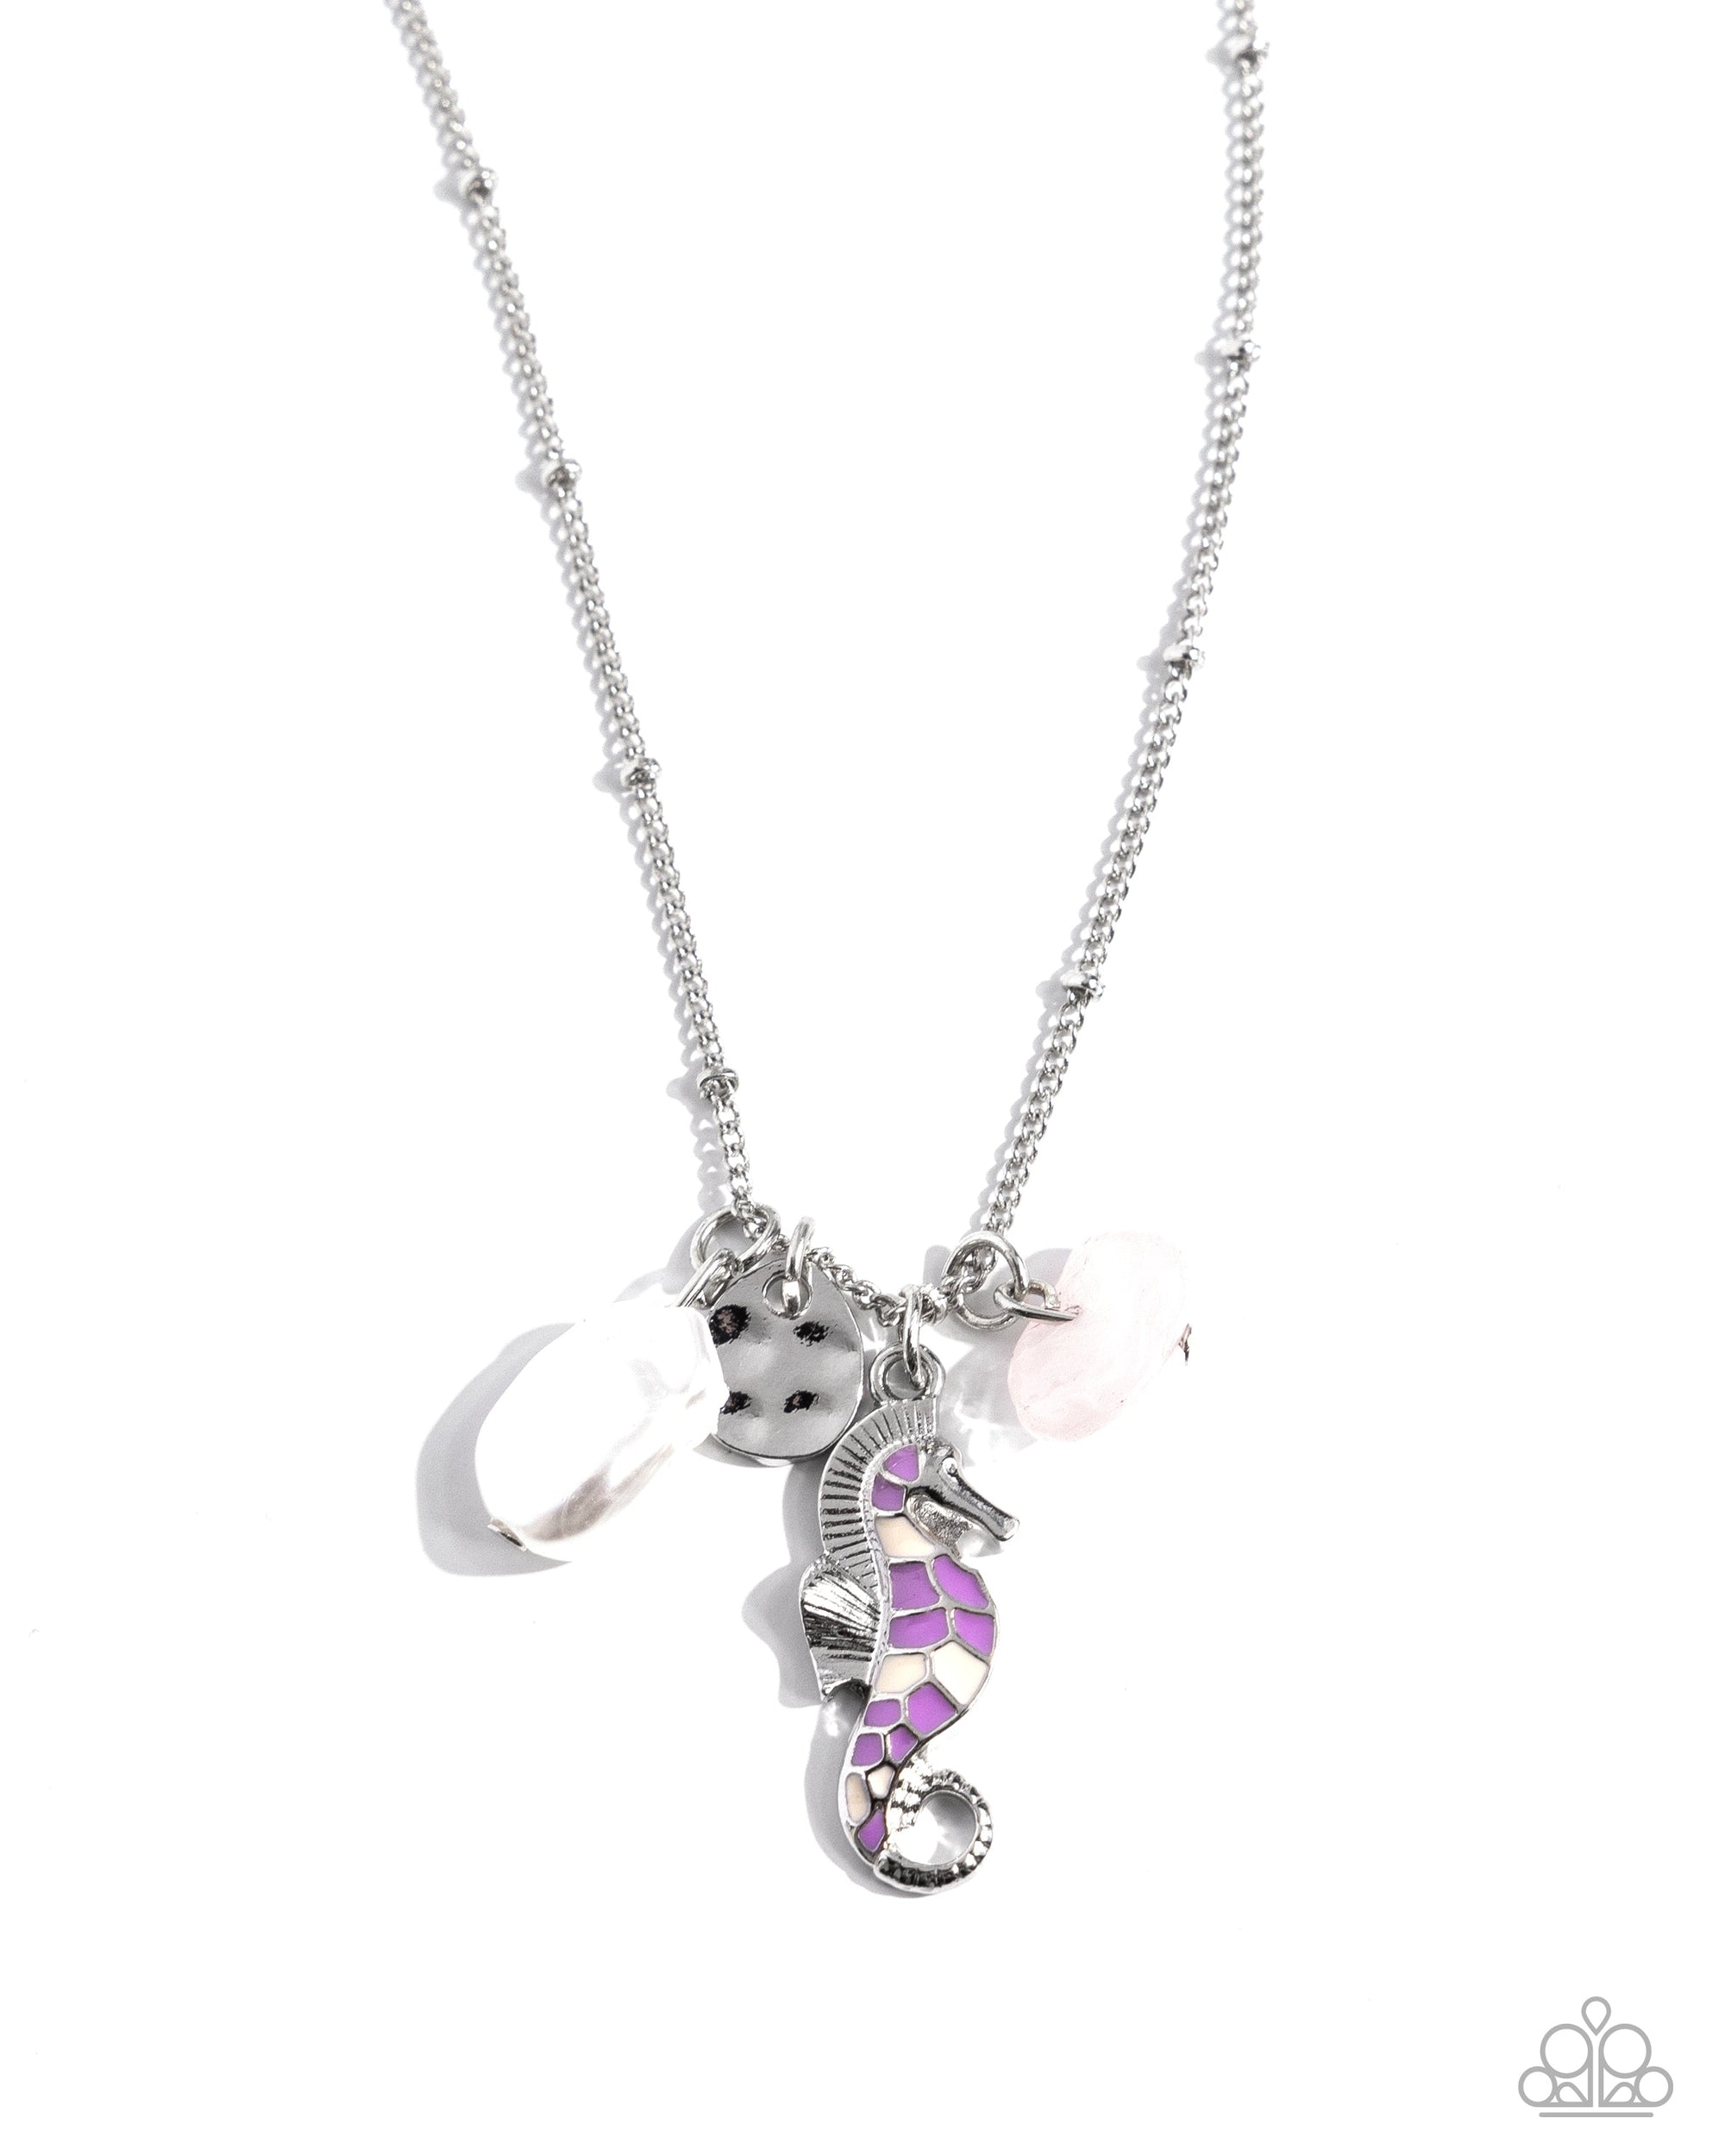 Seahorse Shimmer Purple Necklace - Paparazzi Accessories- lightbox - CarasShop.com - $5 Jewelry by Cara Jewels